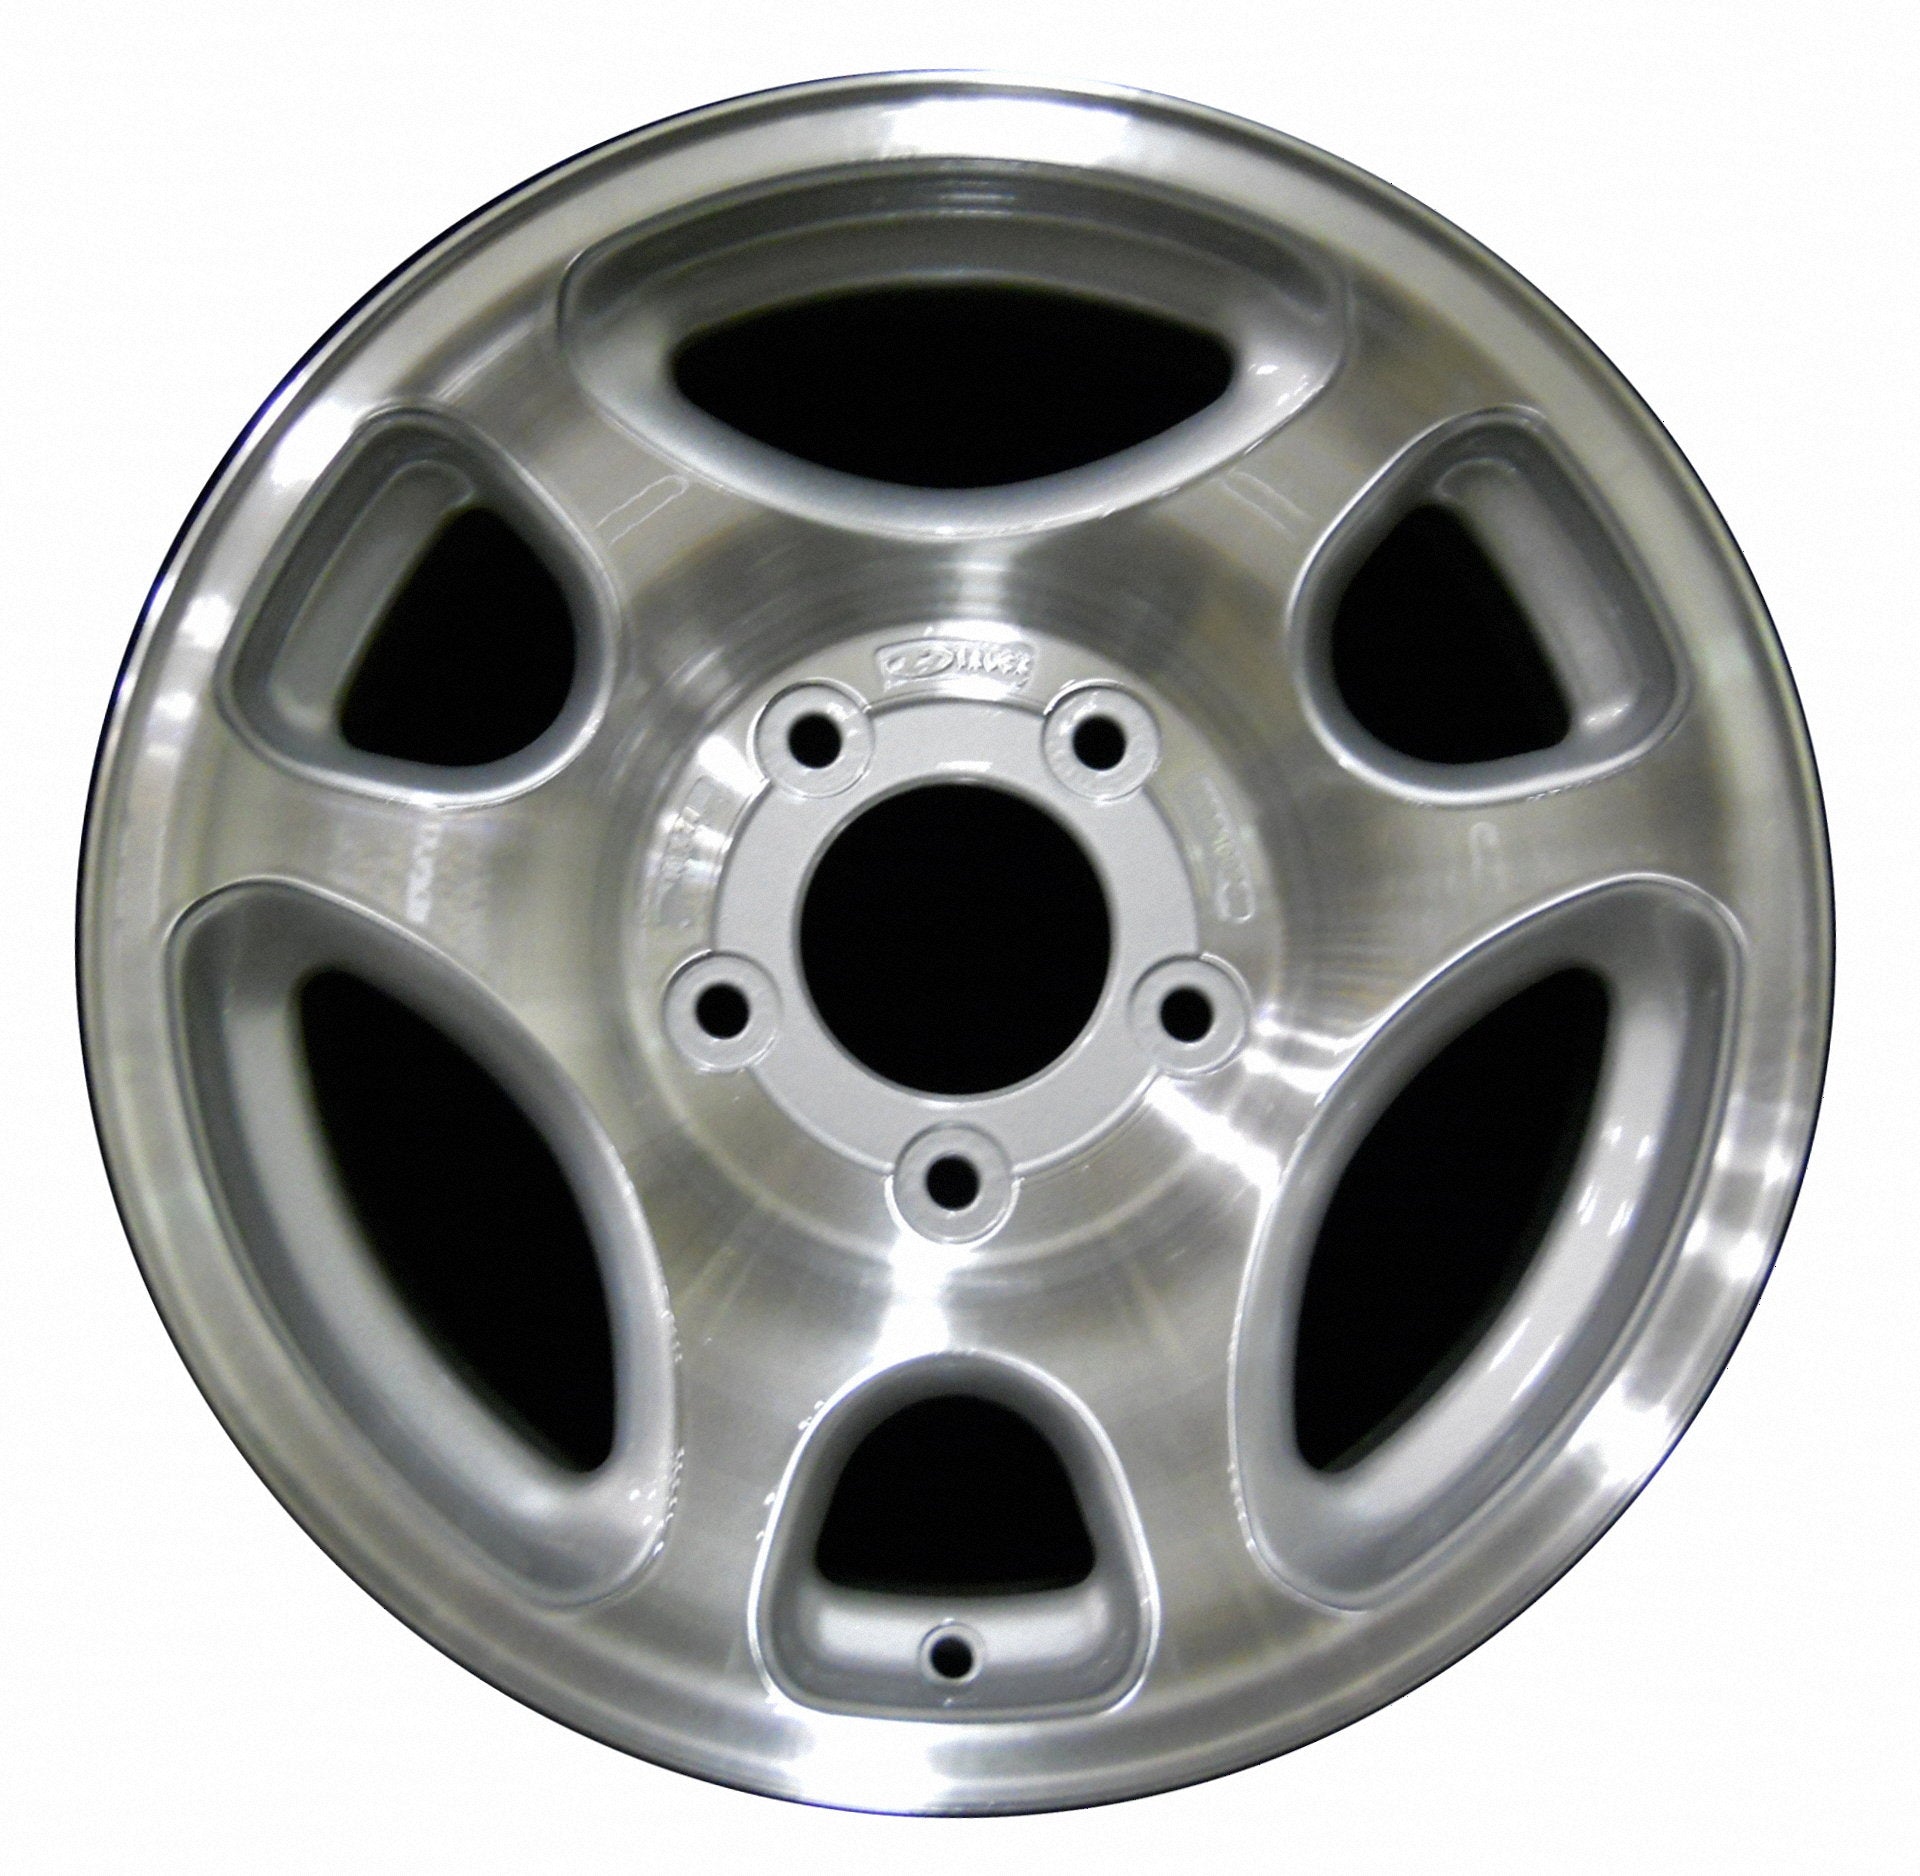 Ford F150 Truck  1997, 1998, 1999 Factory OEM Car Wheel Size 16x7 Alloy WAO.3192.PS02.MA